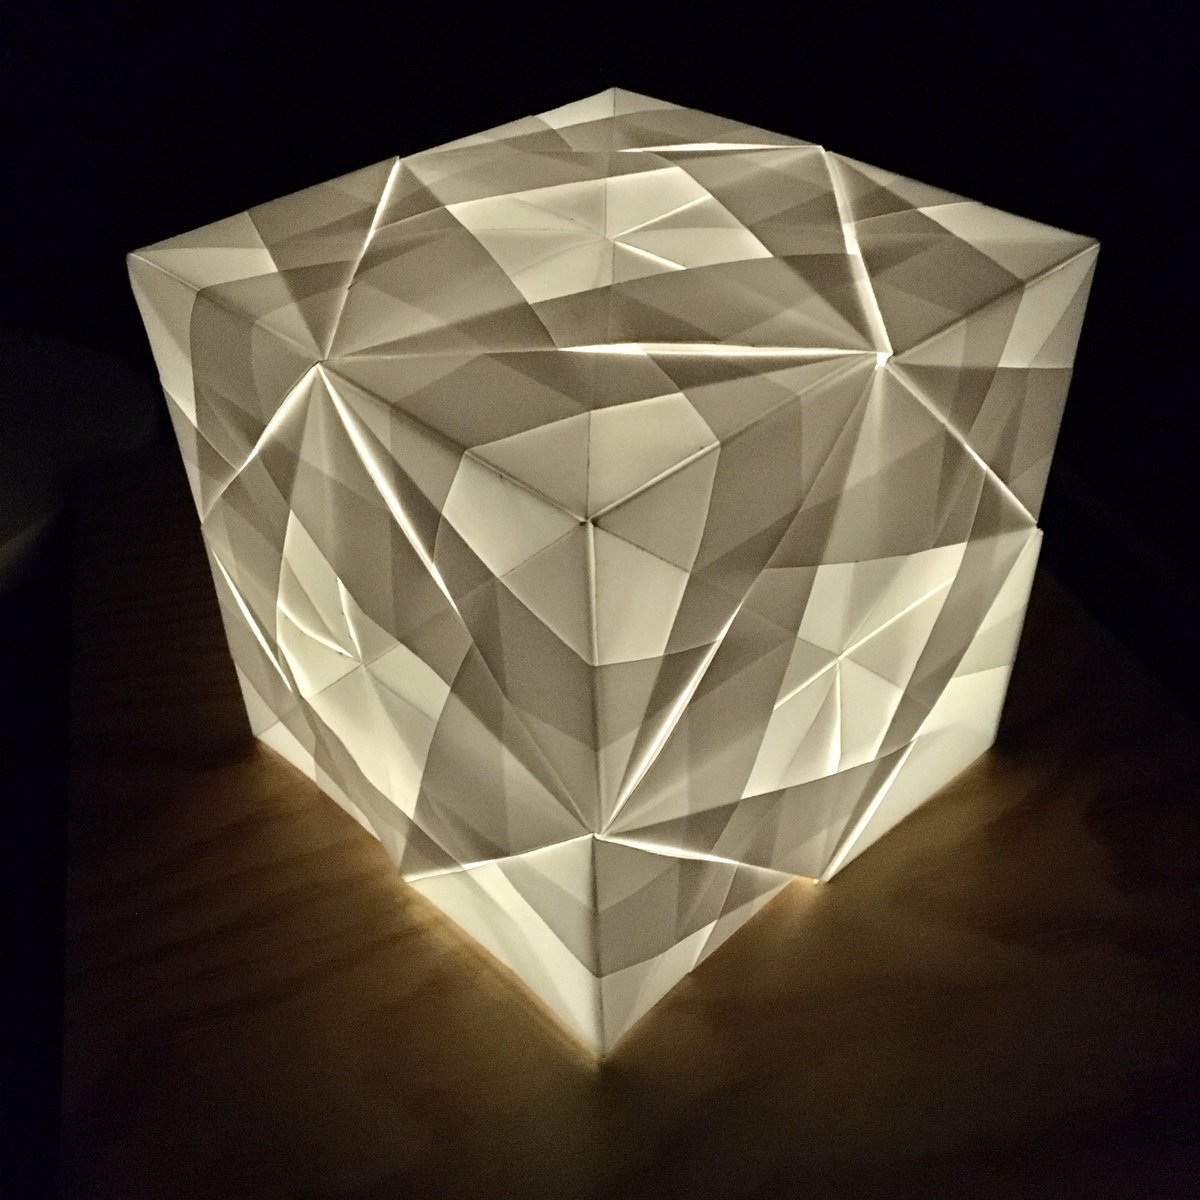 10) Light up your life with beautiful  #origami cube lampshades! Use baking or tracing paper with LED bulbs or fairy lights.10a) These instructions from  @origamifolding make the Sonobe lampshade below  https://origamitutorials.com/sonobe-cube-lamp-tutorial/ Can you spot the Pythagoras’ Theorem proof?